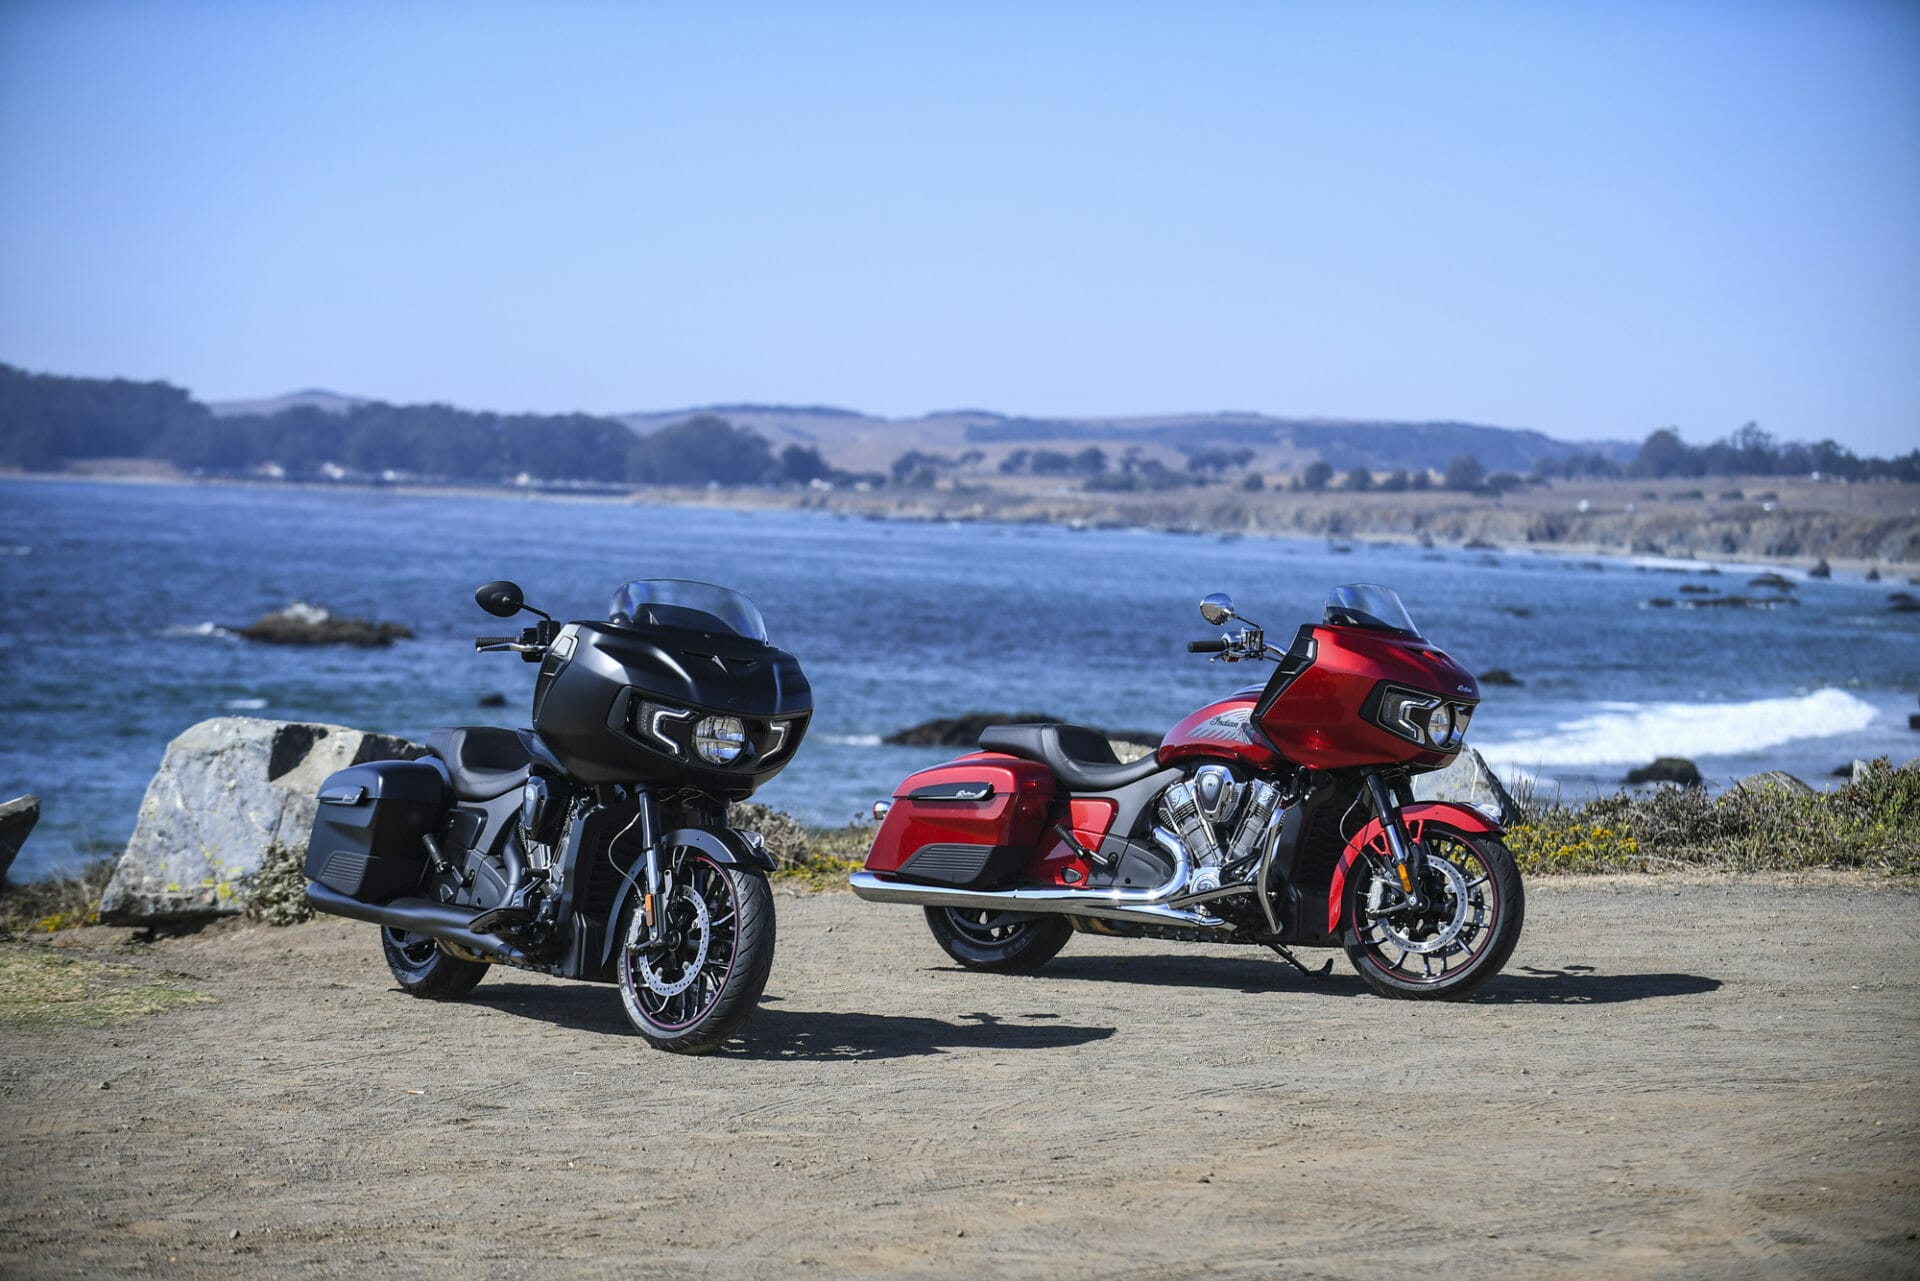 Indian Motorcycles: Brake light problems on 2020 to 2022 models